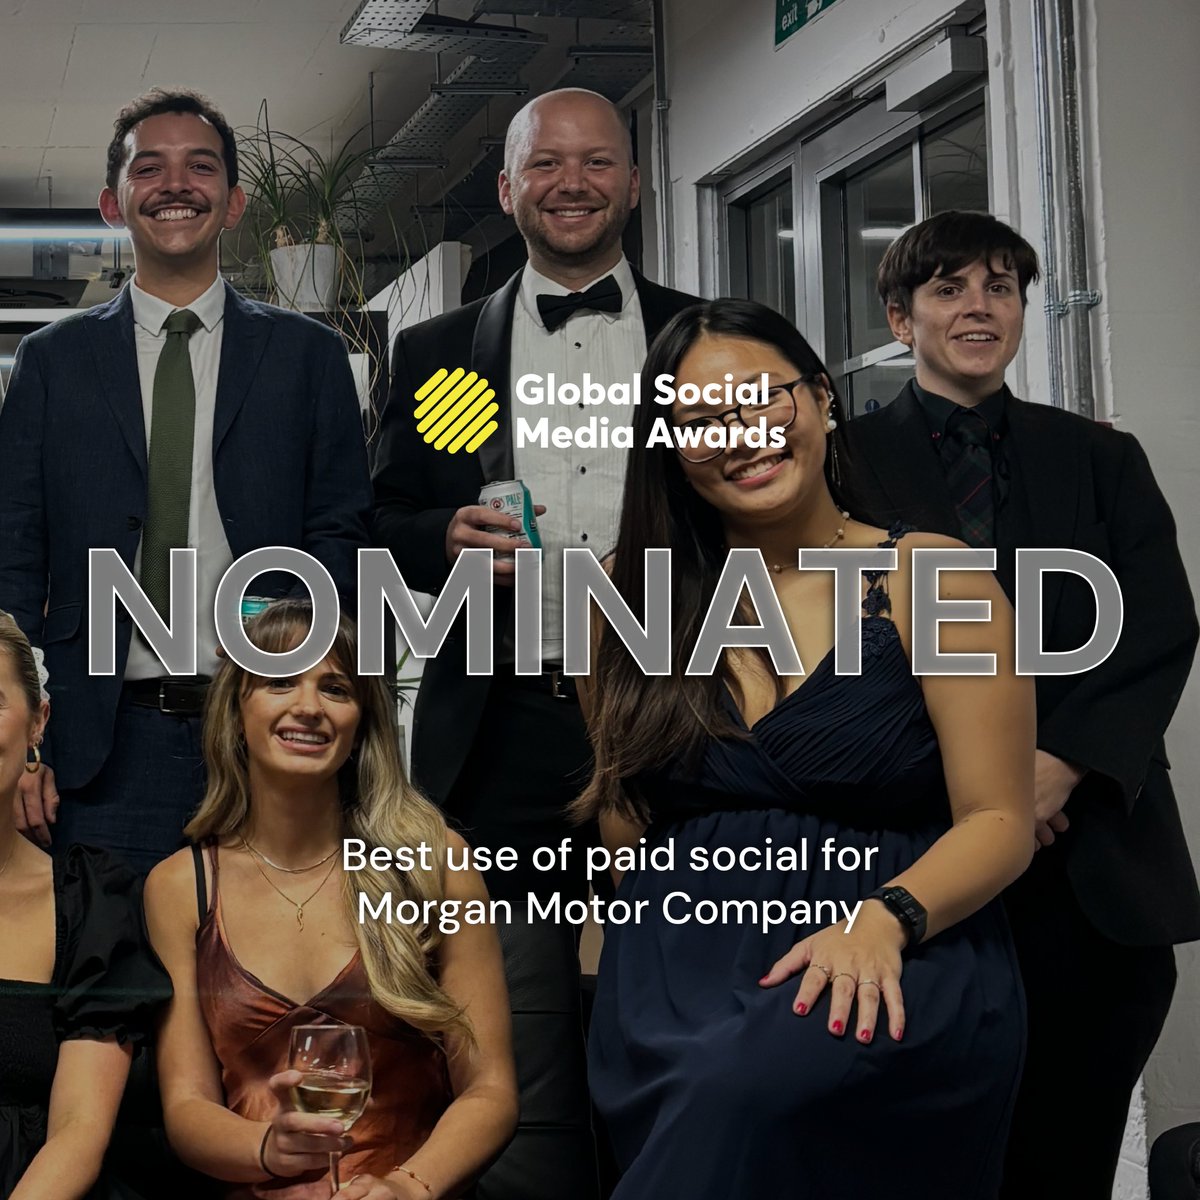 Double whammy! We’re thrilled to be in the running for TWO awards at this year’s Global Social Media Awards: Best Large Agency, and Best Use of Paid Social for our work with @morganmotor. 🕺🕺